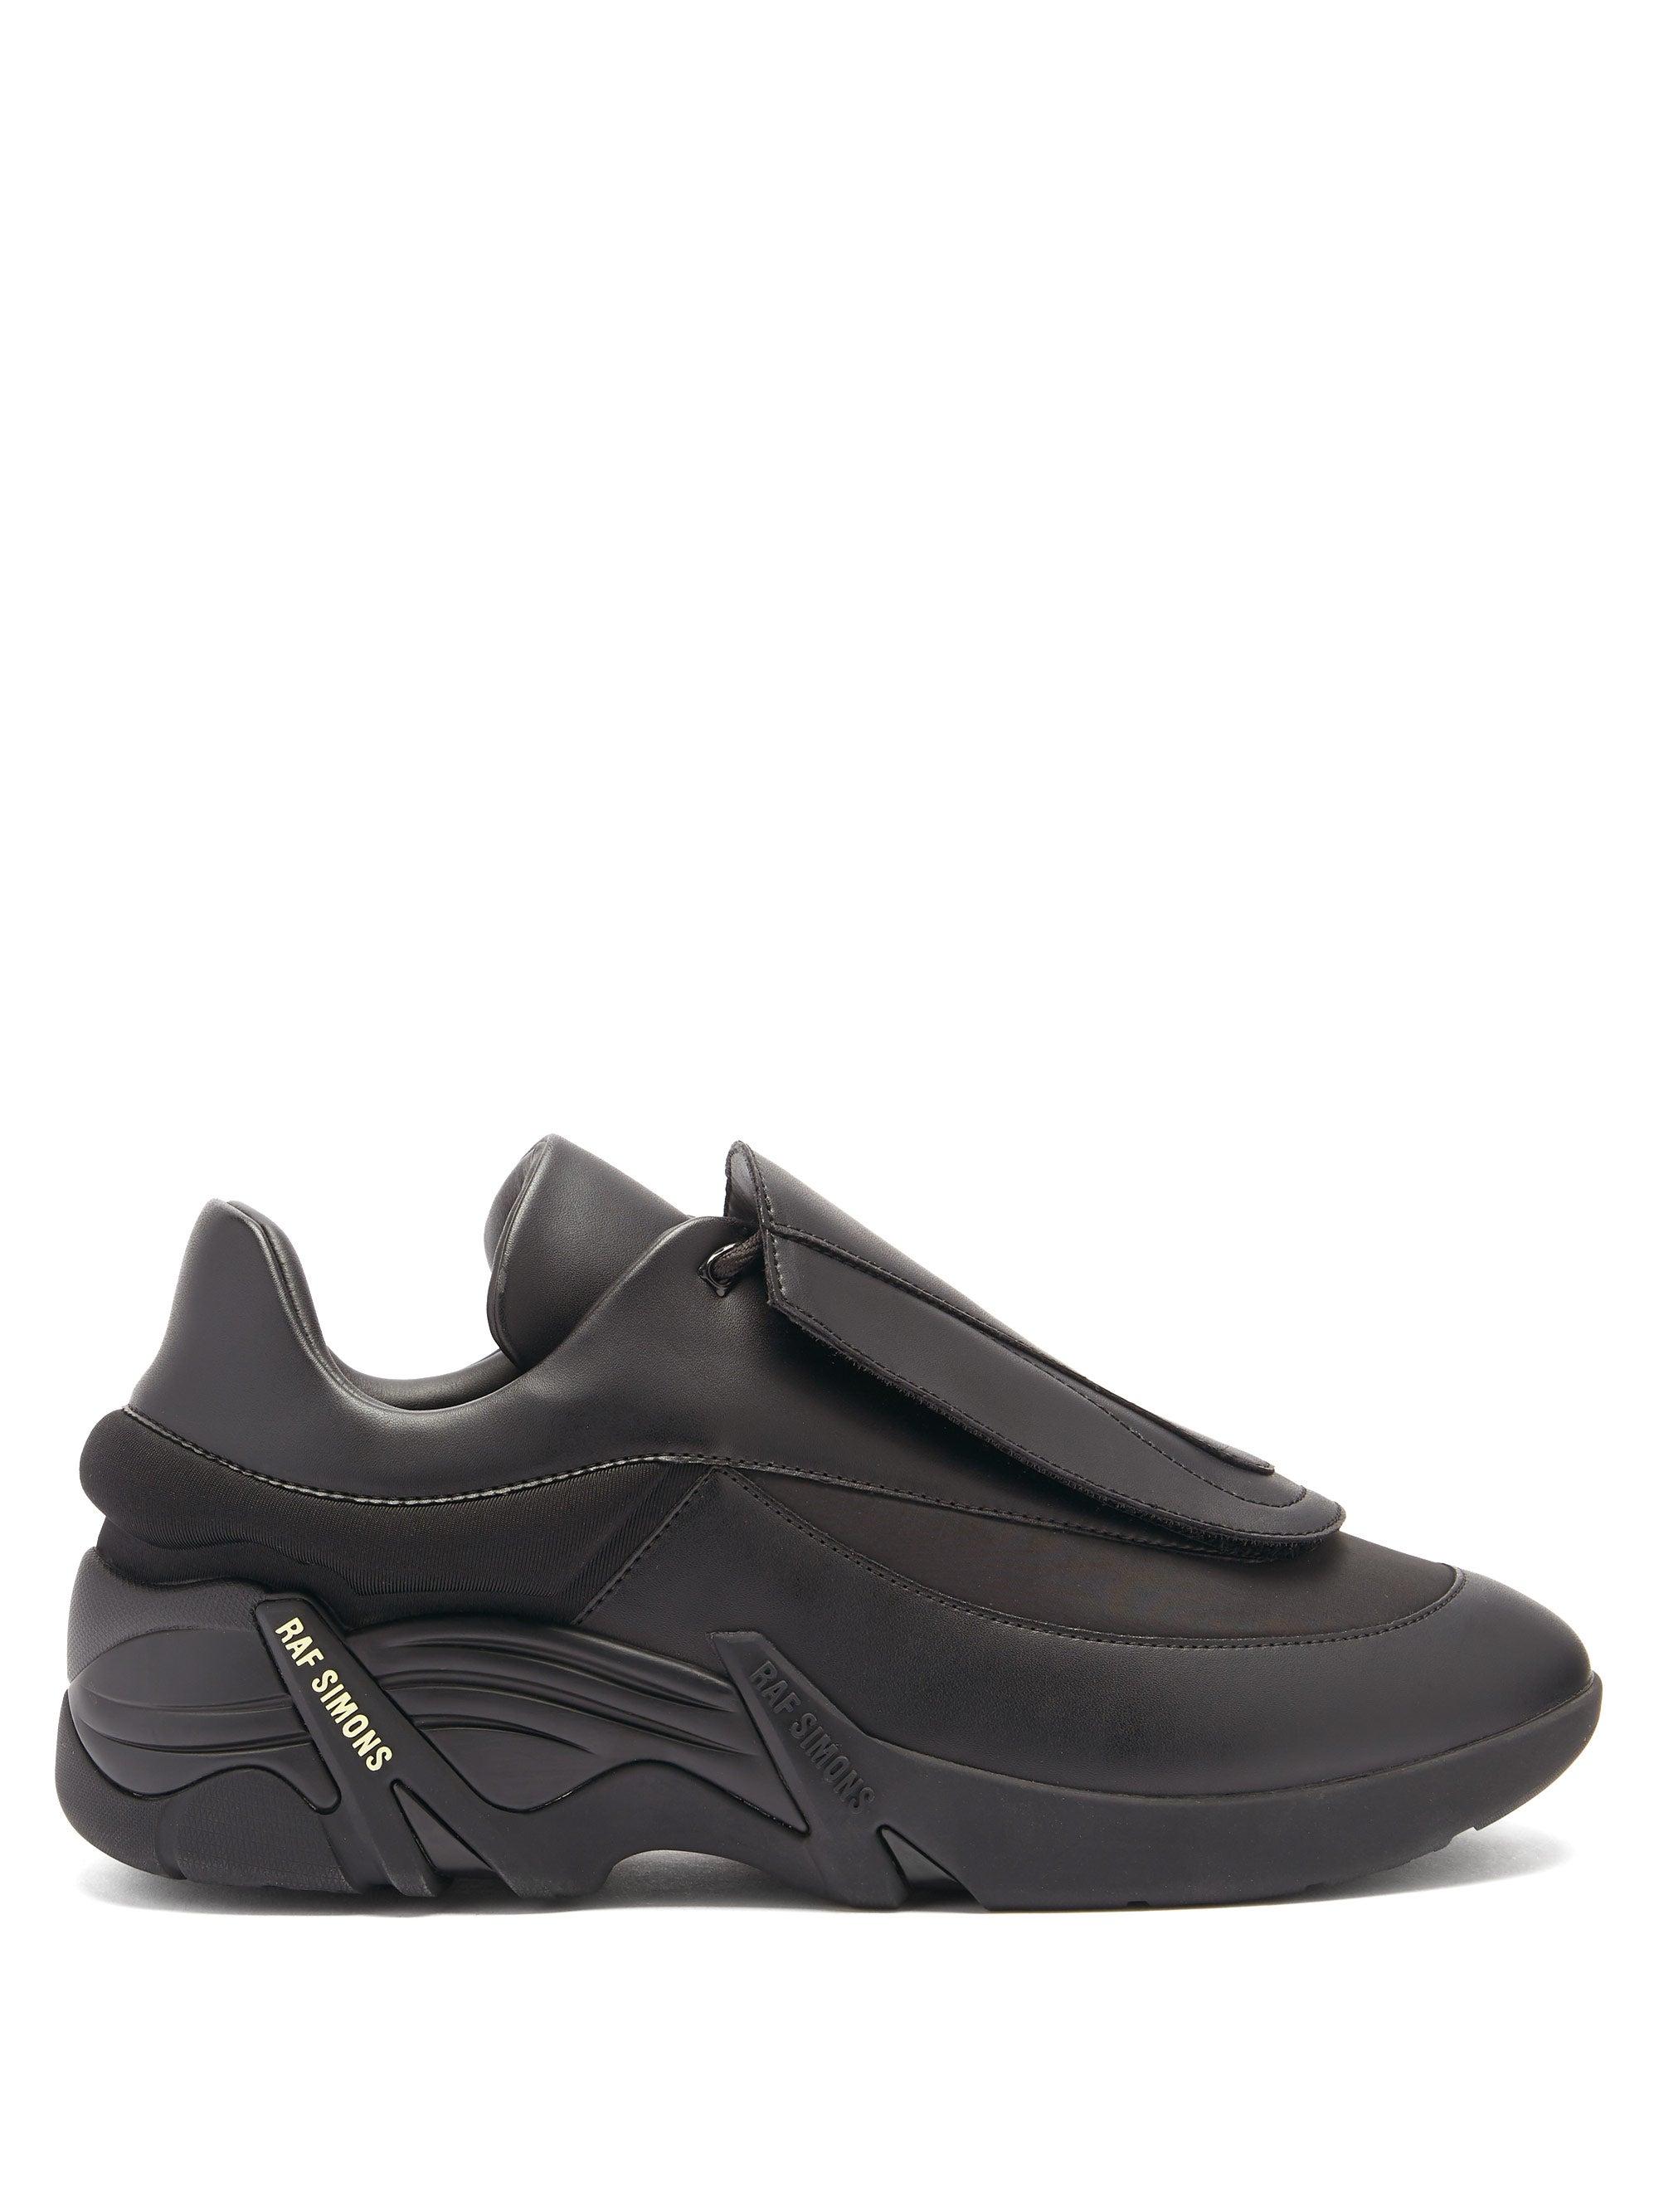 Raf Simons Antei Exaggerated-sole Leather Trainers in Black for Men - Lyst